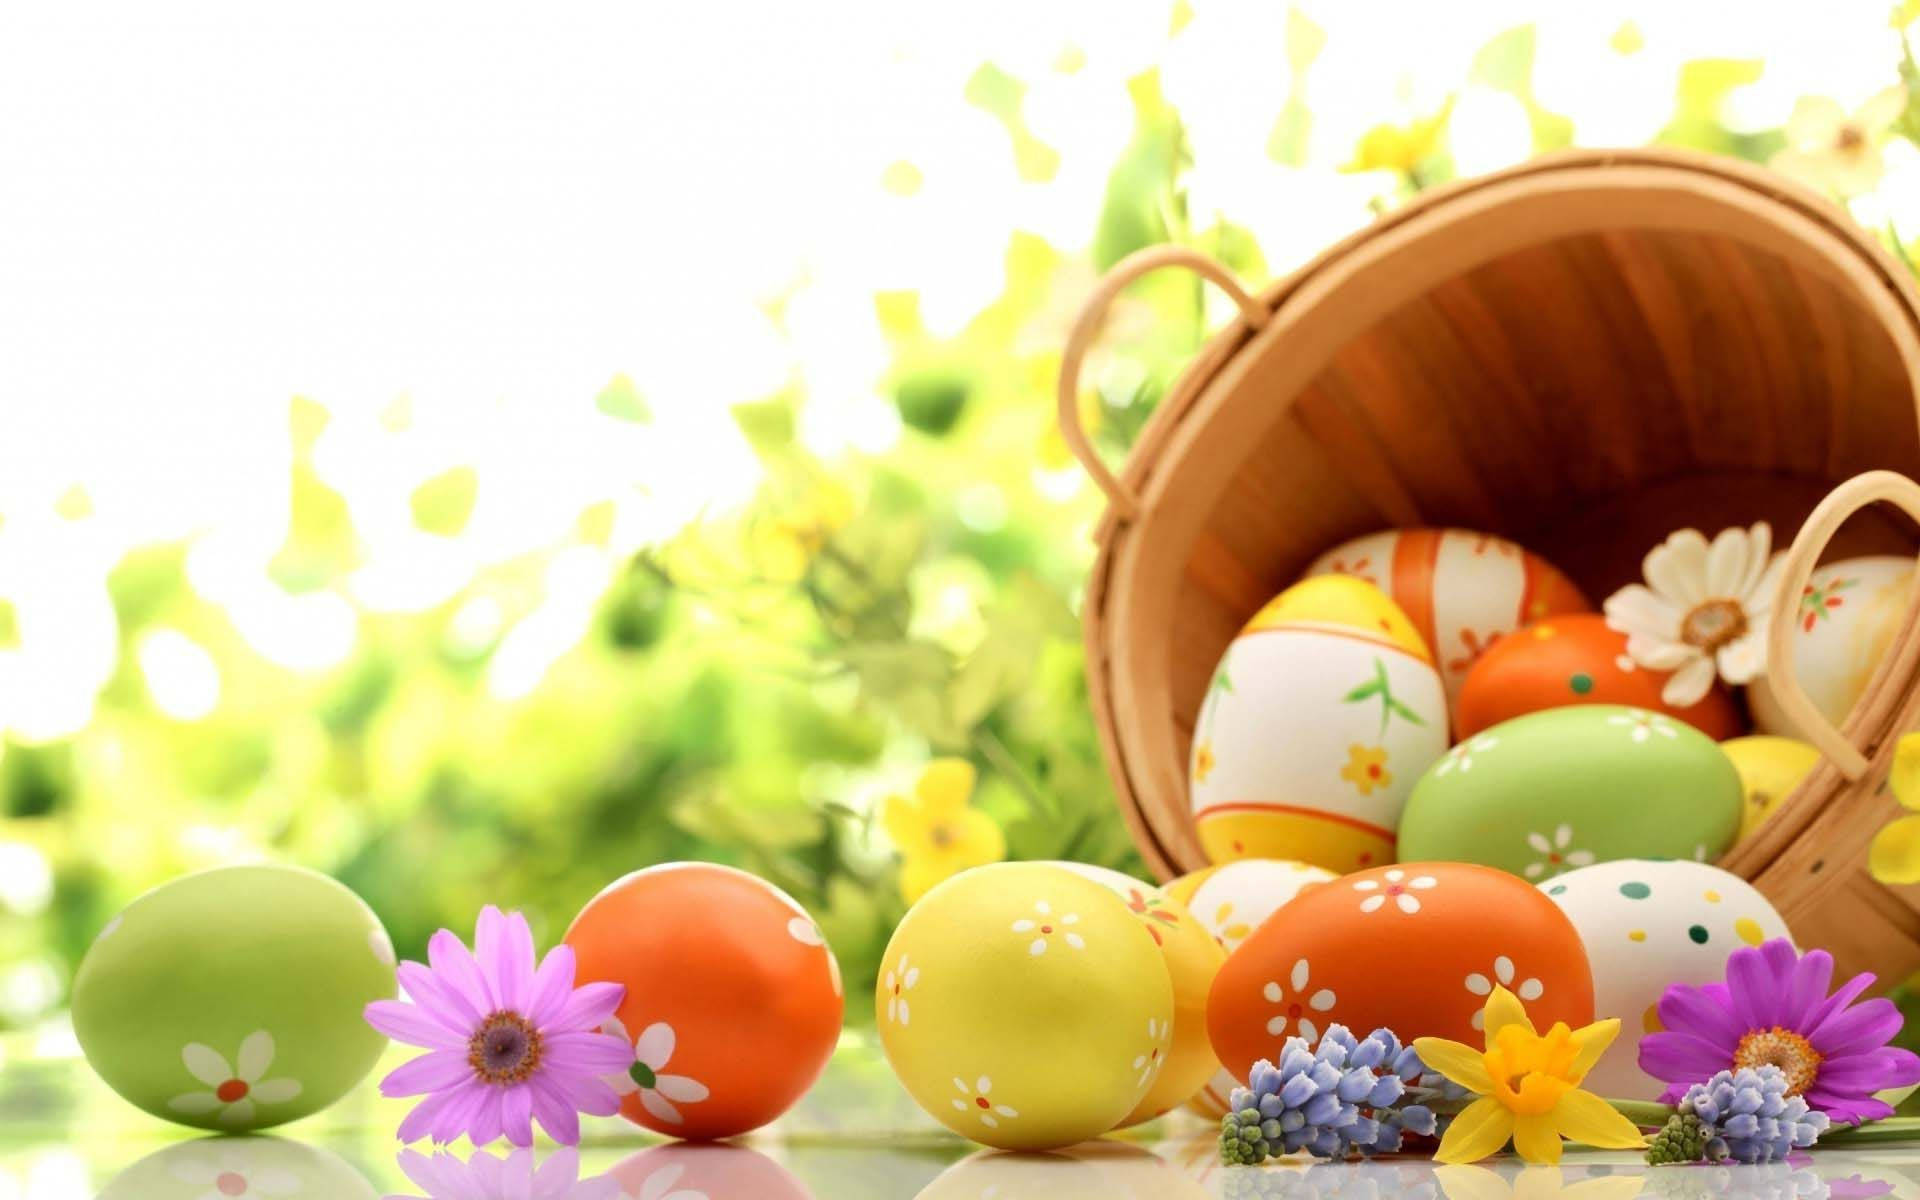 Happy Easter Basket Rolling With Colorful Eggs Wallpaper